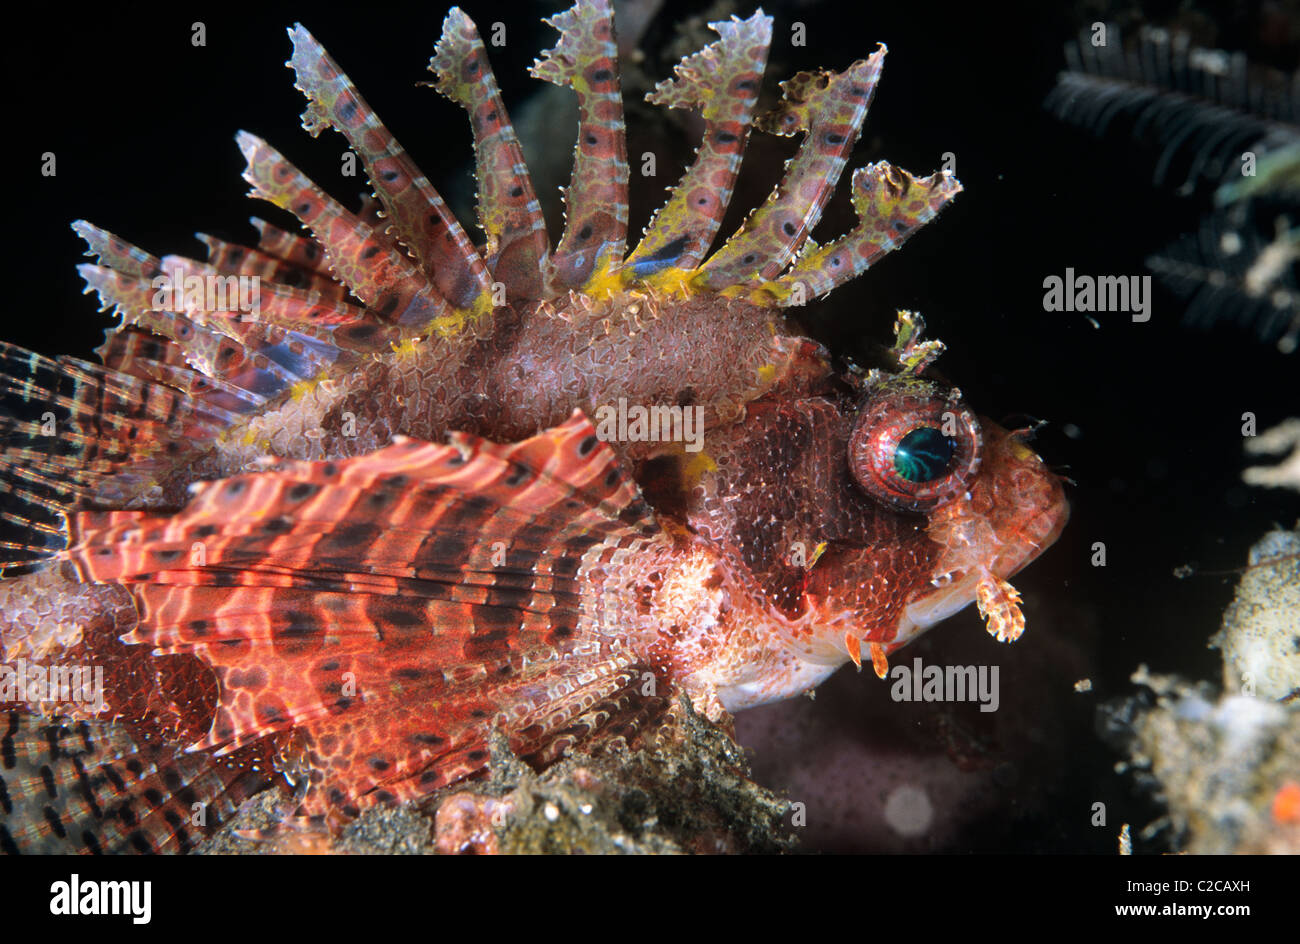 Shortfin Lionfish, Dendrochirus brachypterus, with extended fins, Lembeh Straits, near Bitung, Sulawesi, Indonesia, Asia Stock Photo